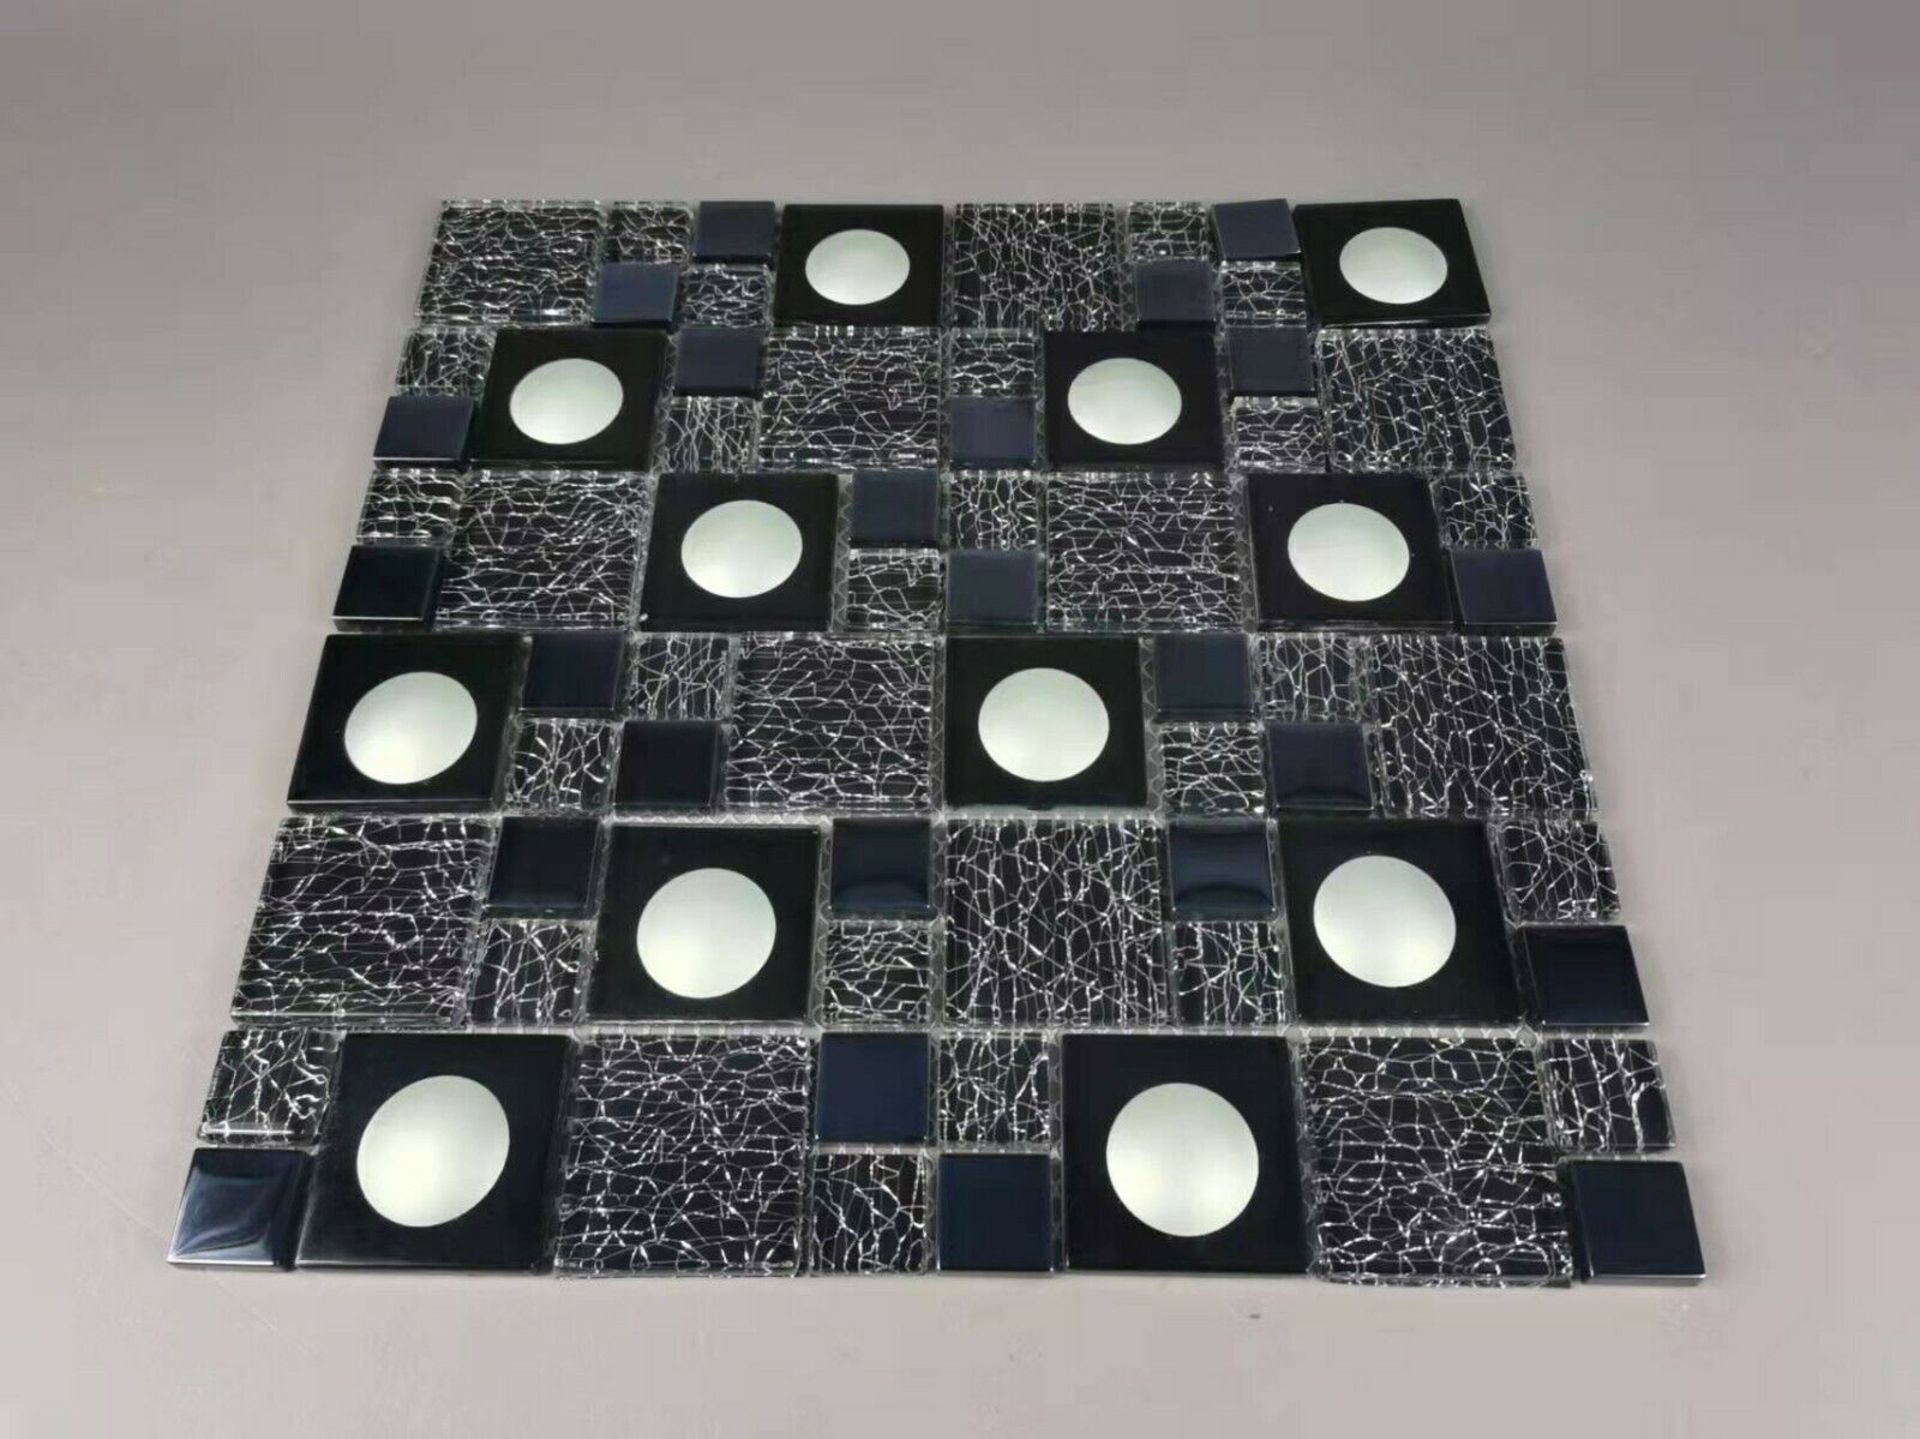 5 Square Metres - High Quality Glass/Stainless Steel Mosaic Tiles - Image 4 of 4